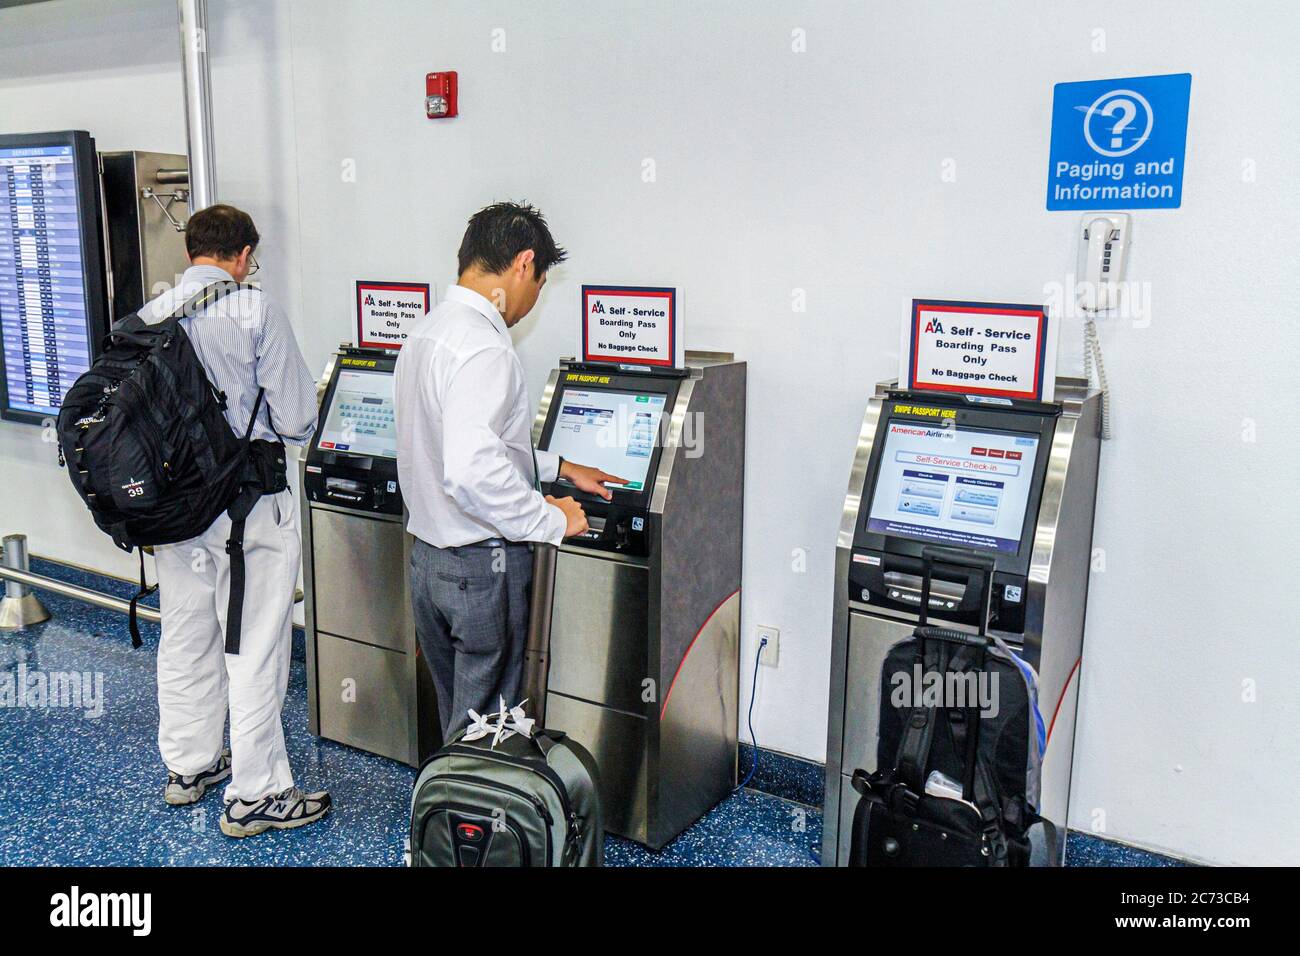 Miami Florida International Airport MIA,terminal,American Airlines,carrier,self service boarding pass,Asian man men male adult adults,luggage,suitcase Stock Photo